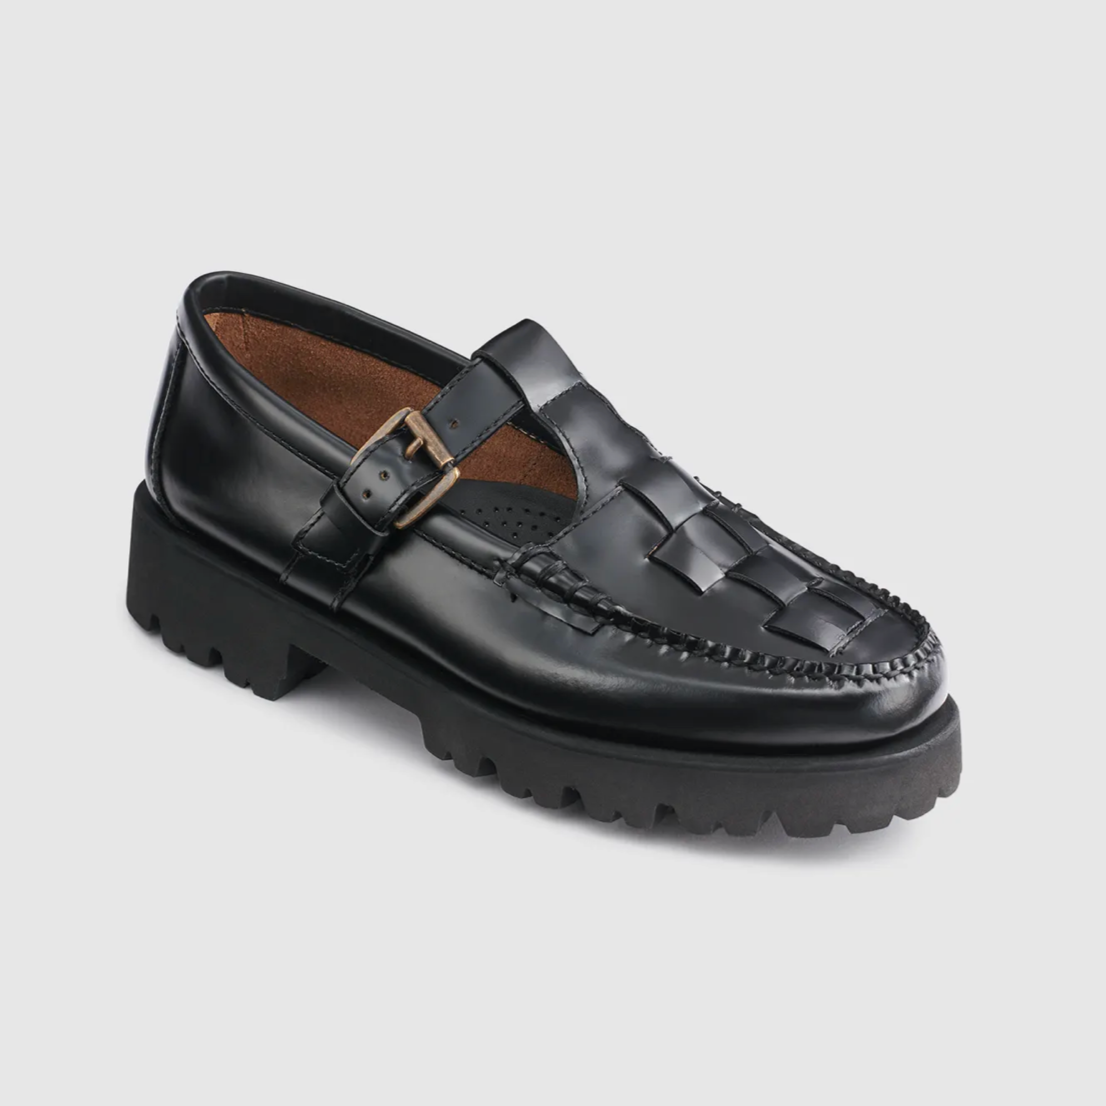 G.H. BASS MARY JANE FISHERMAN LOAFER W